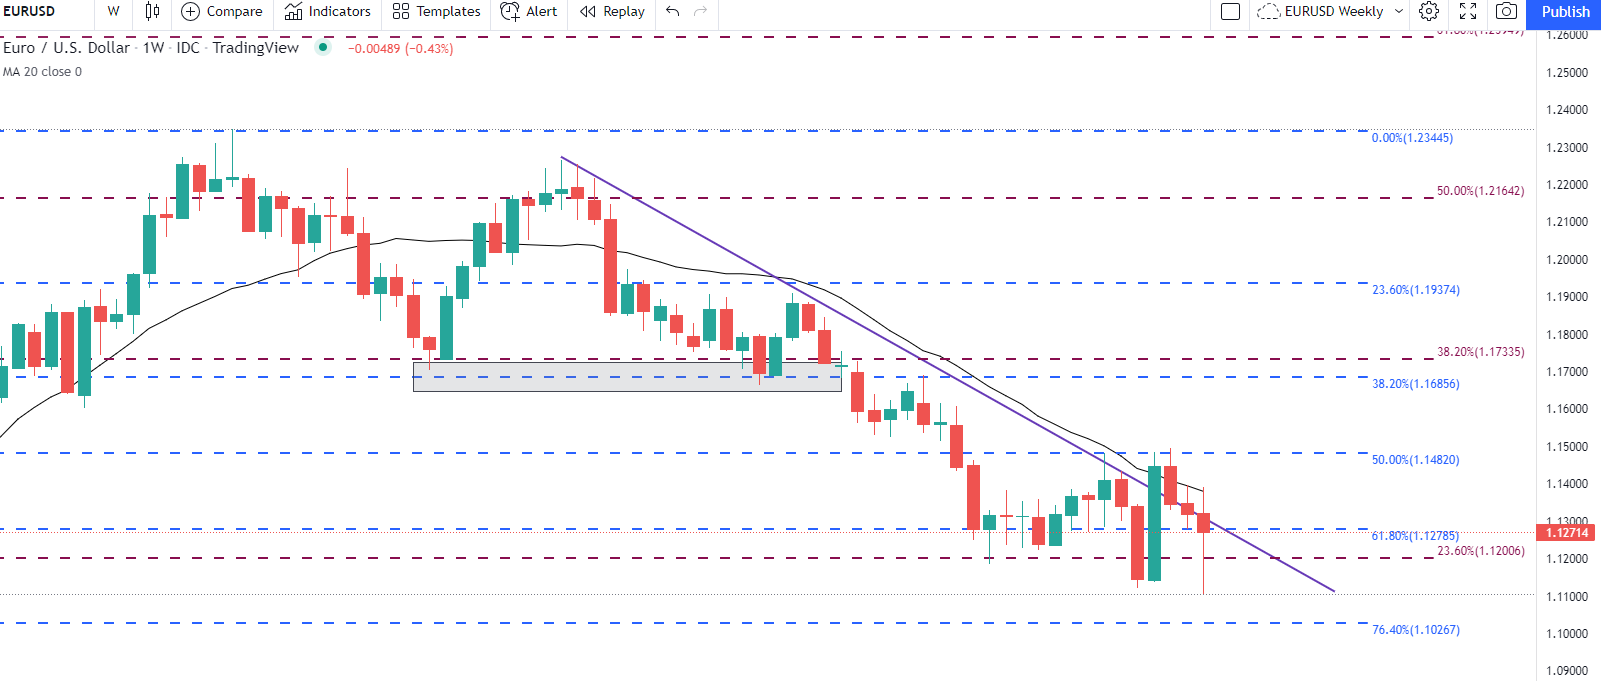 US Dollar Outlook: DXY, EUR/USD, GBP/USD Key Technical Levels